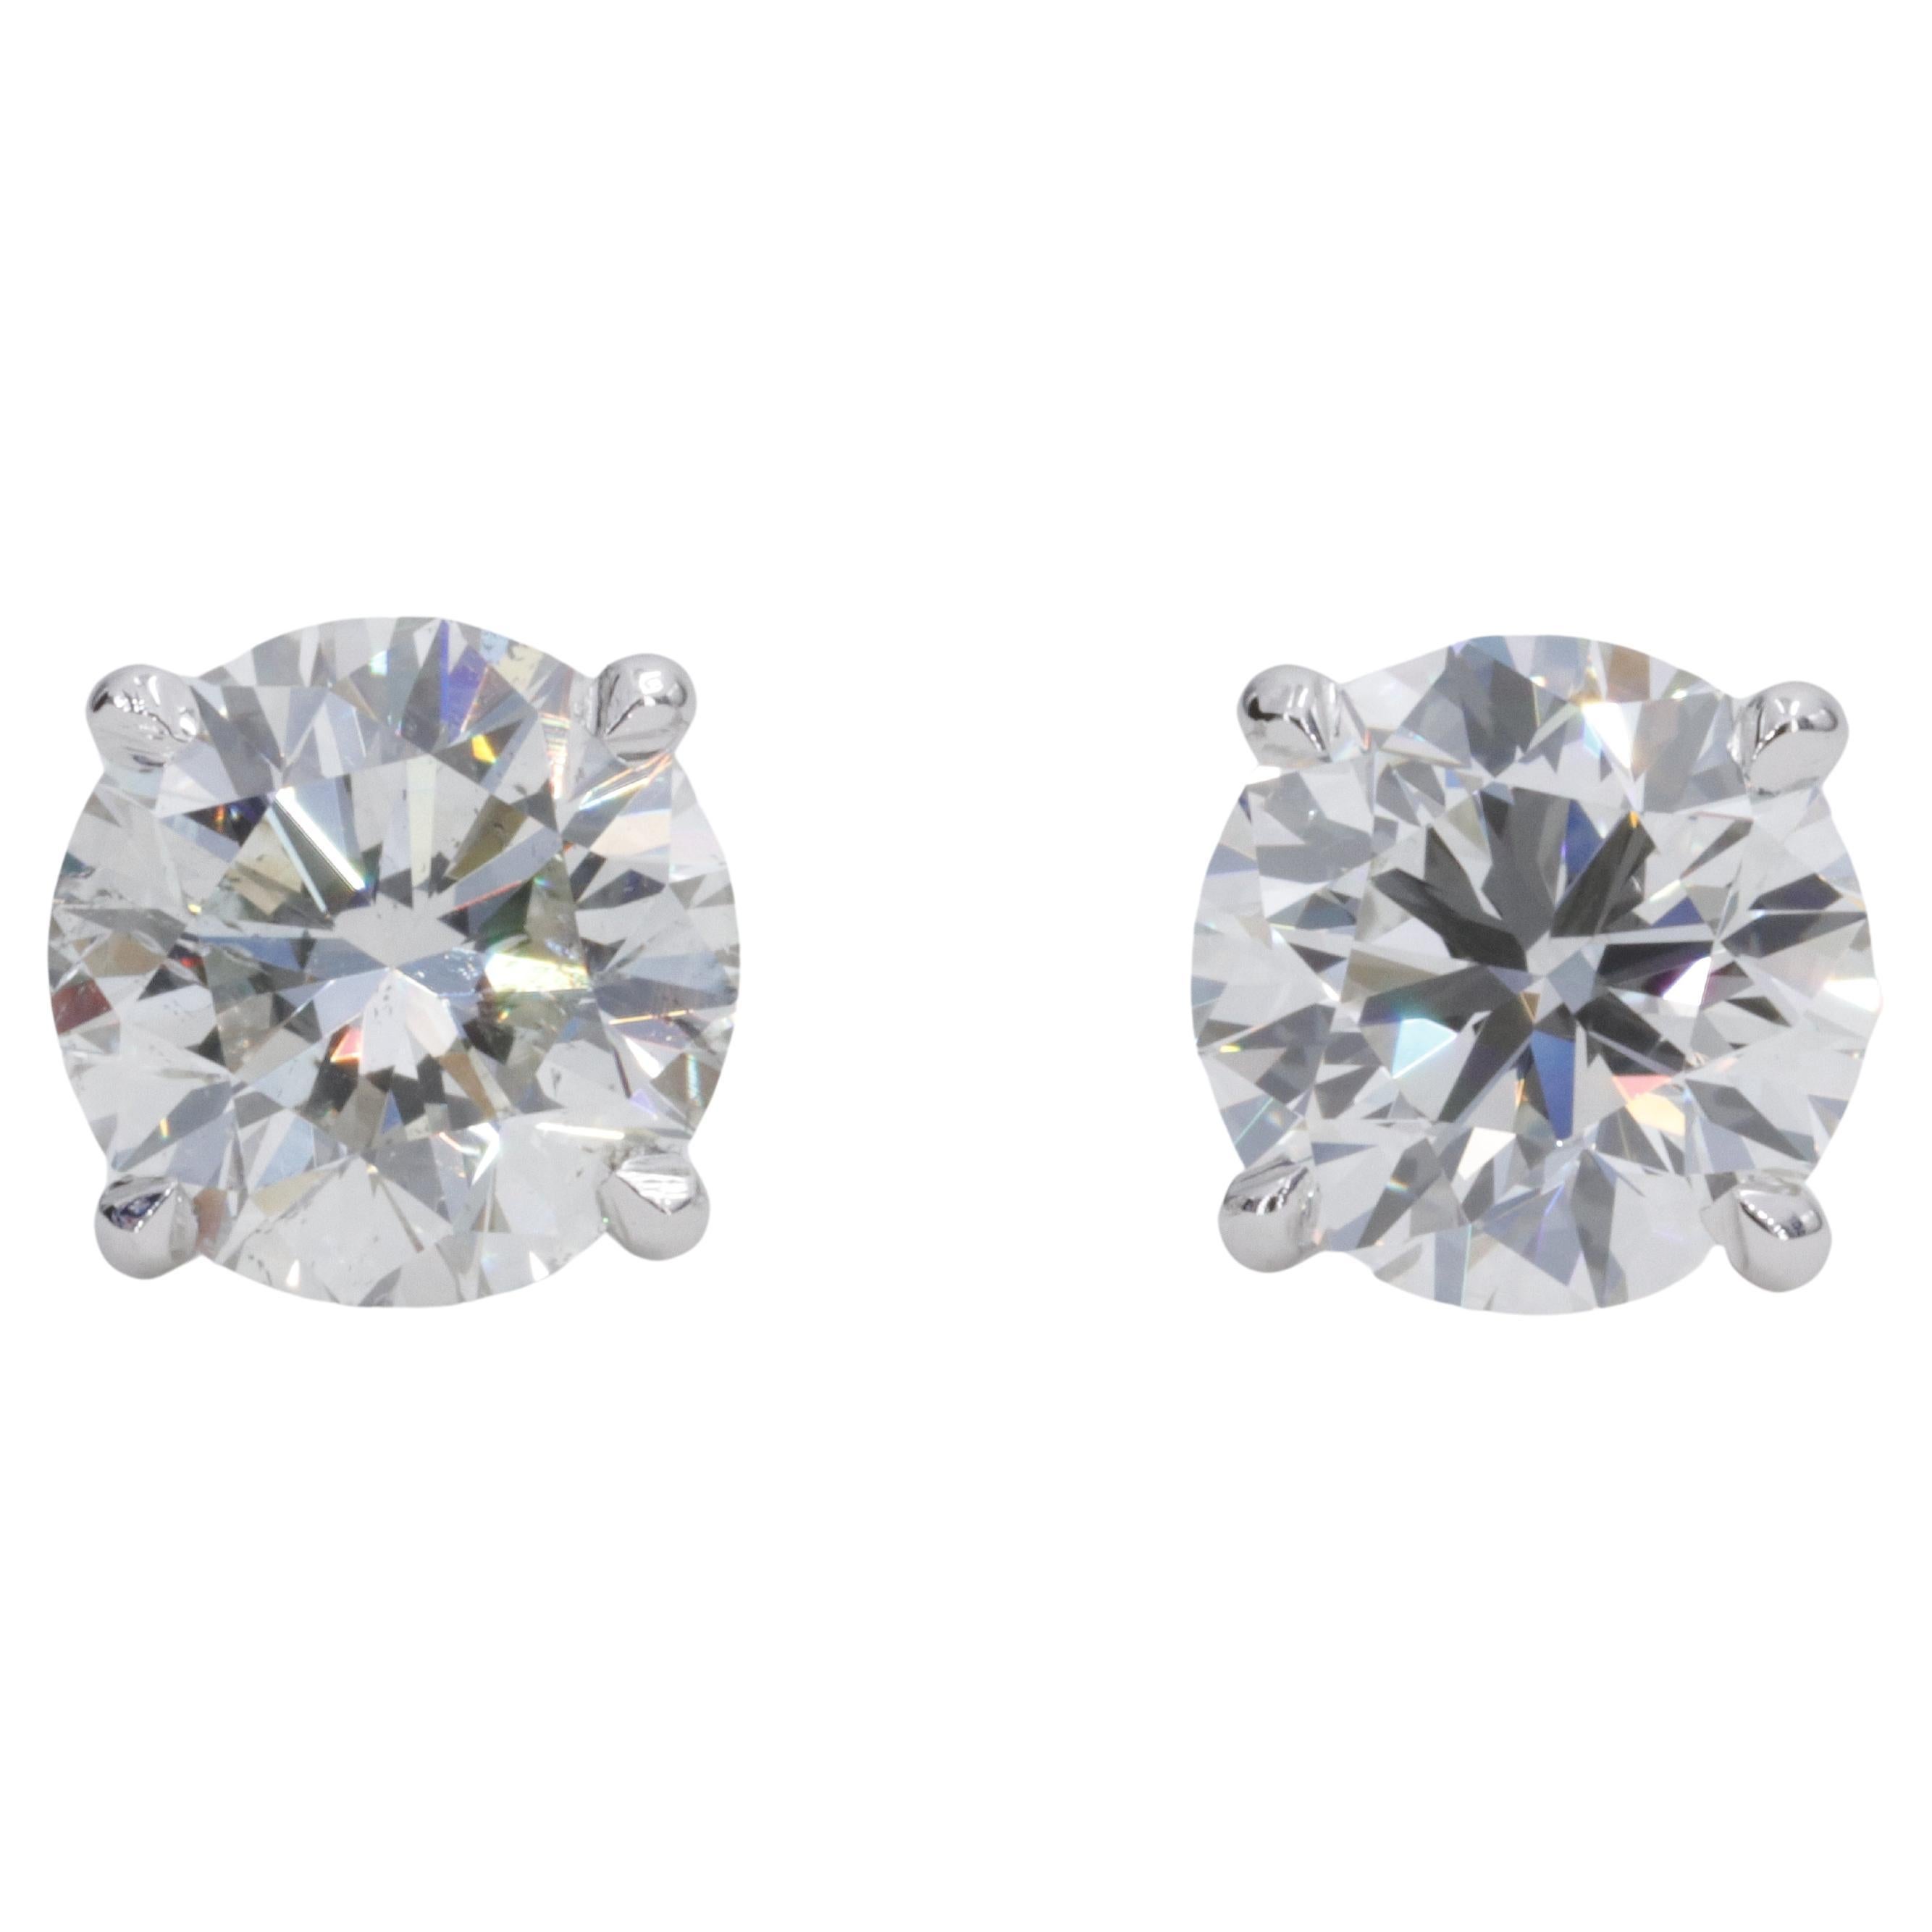 2.06 Carat GIA Natural Diamond Stud Earrings in White Gold 4 Prong Settings For Sale